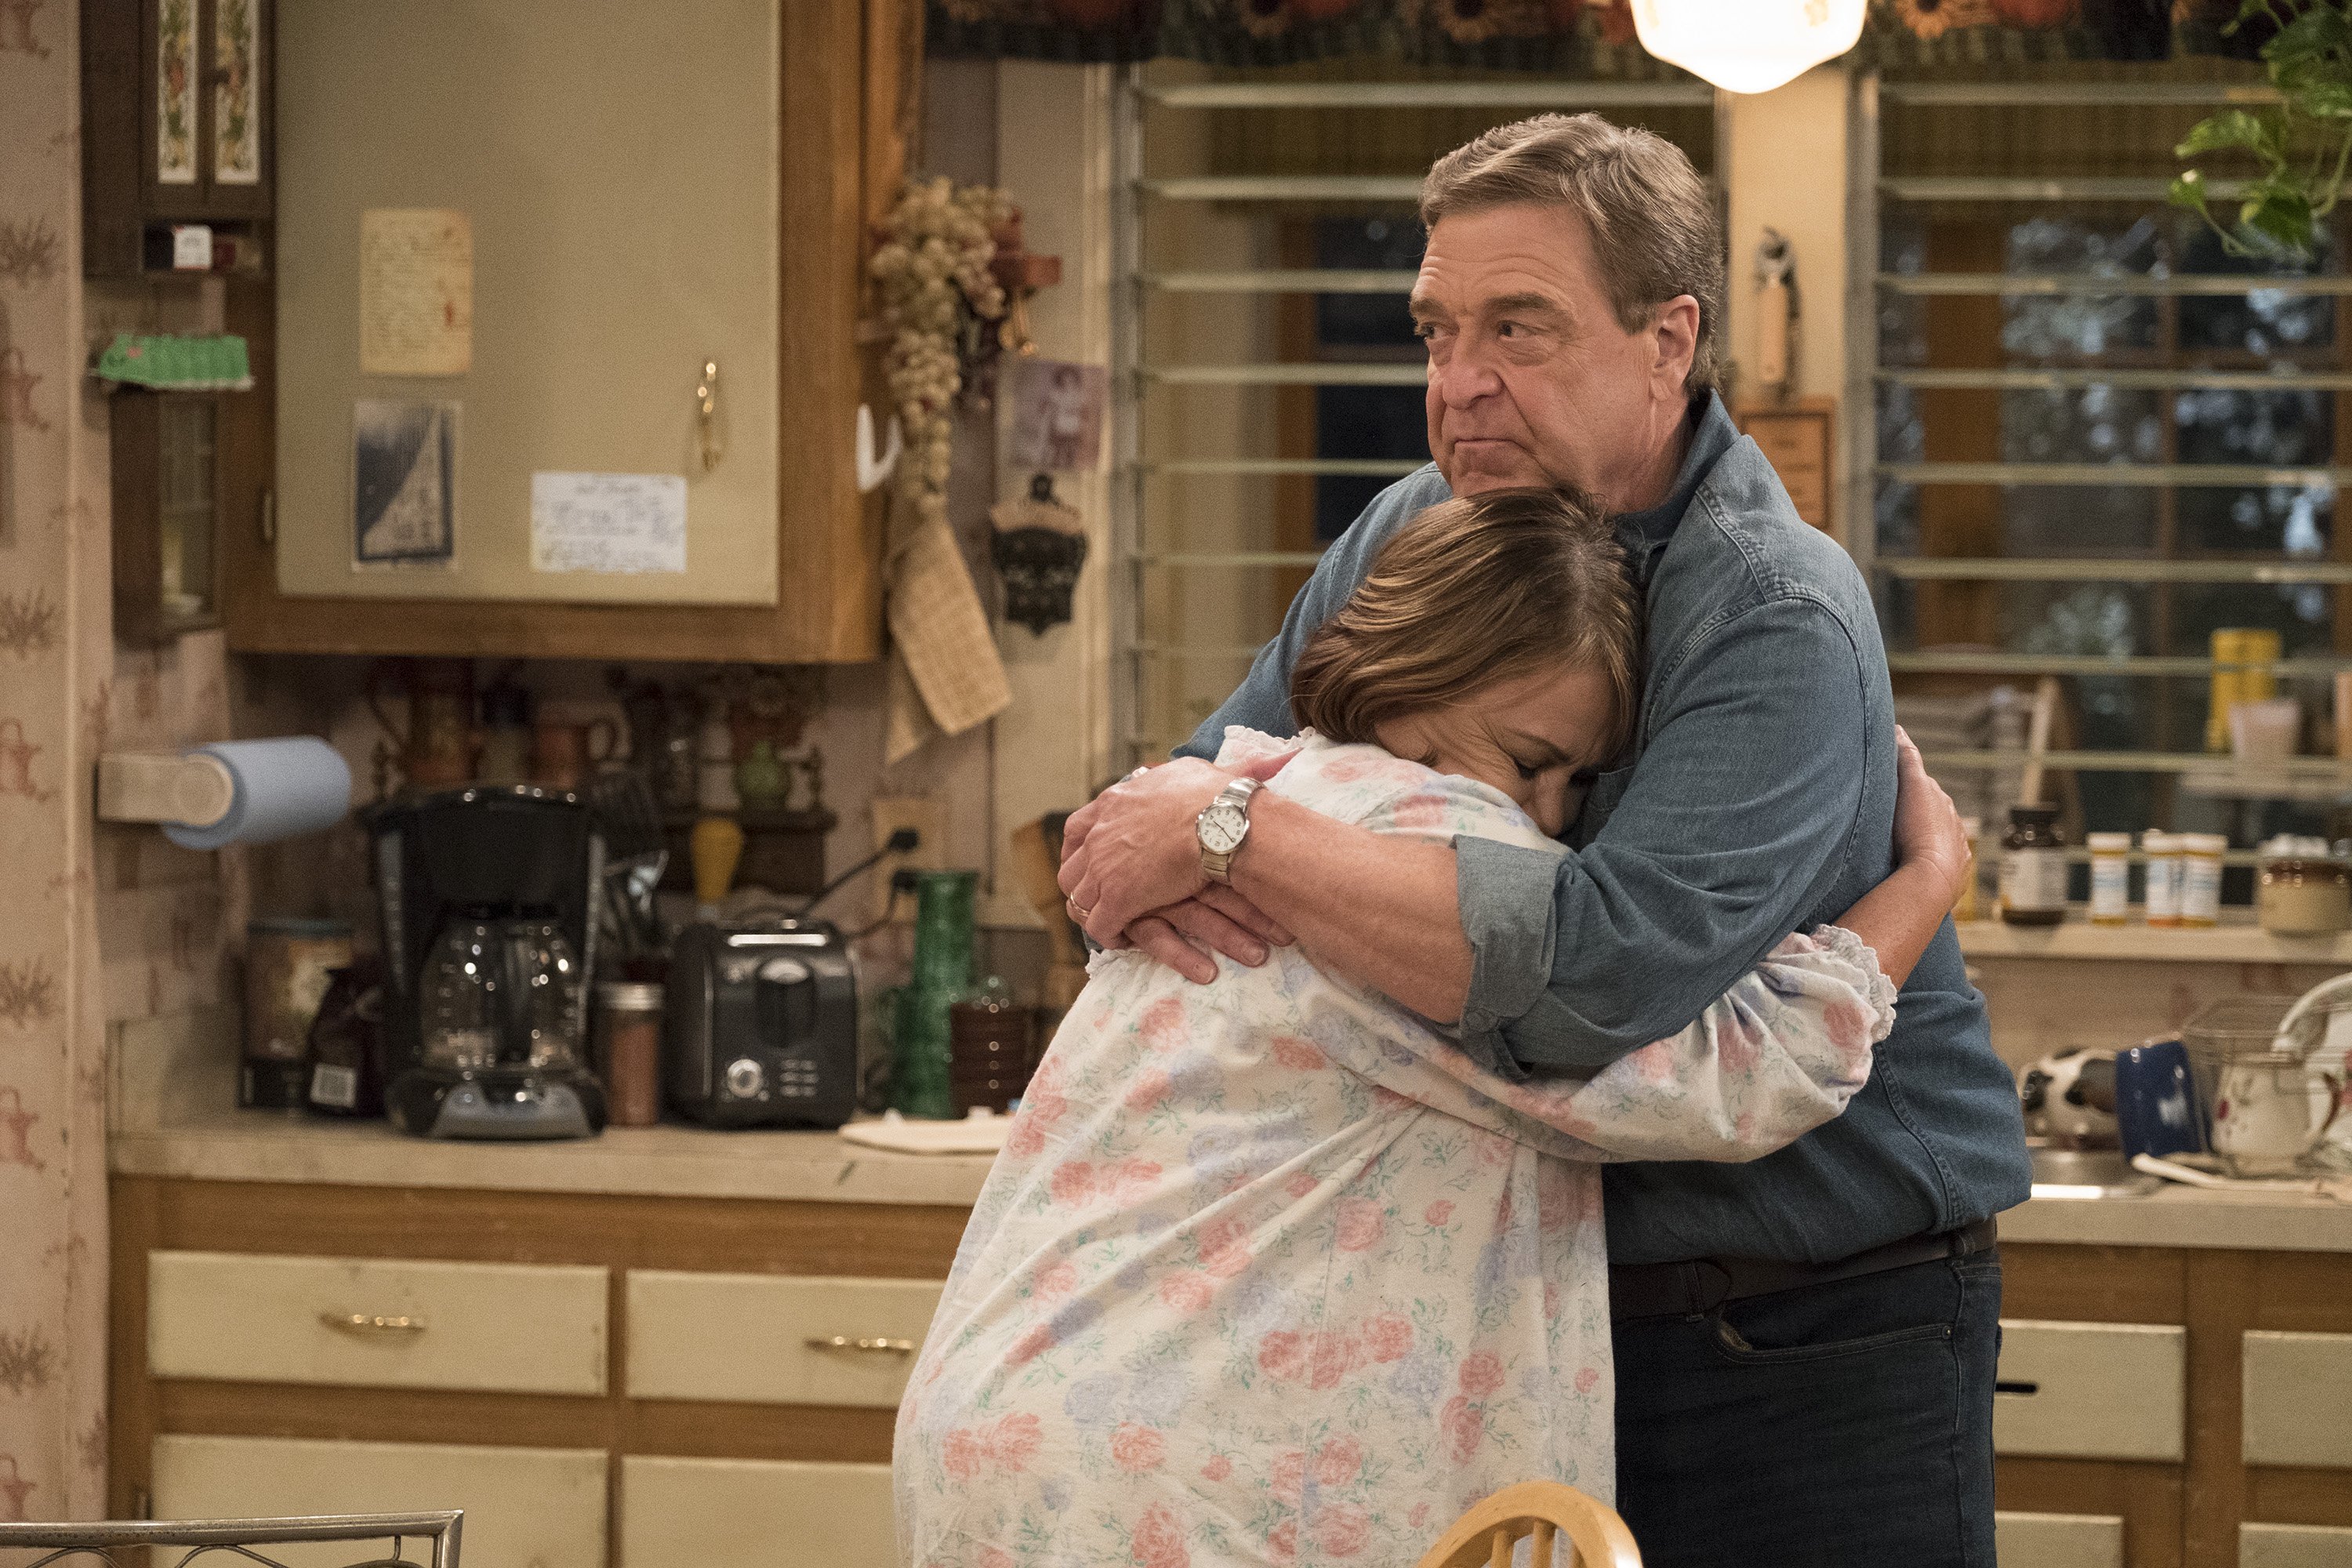 Roseanne Barr and John Goodman on the set of the revival of "Roseanne" | Source: Getty Images